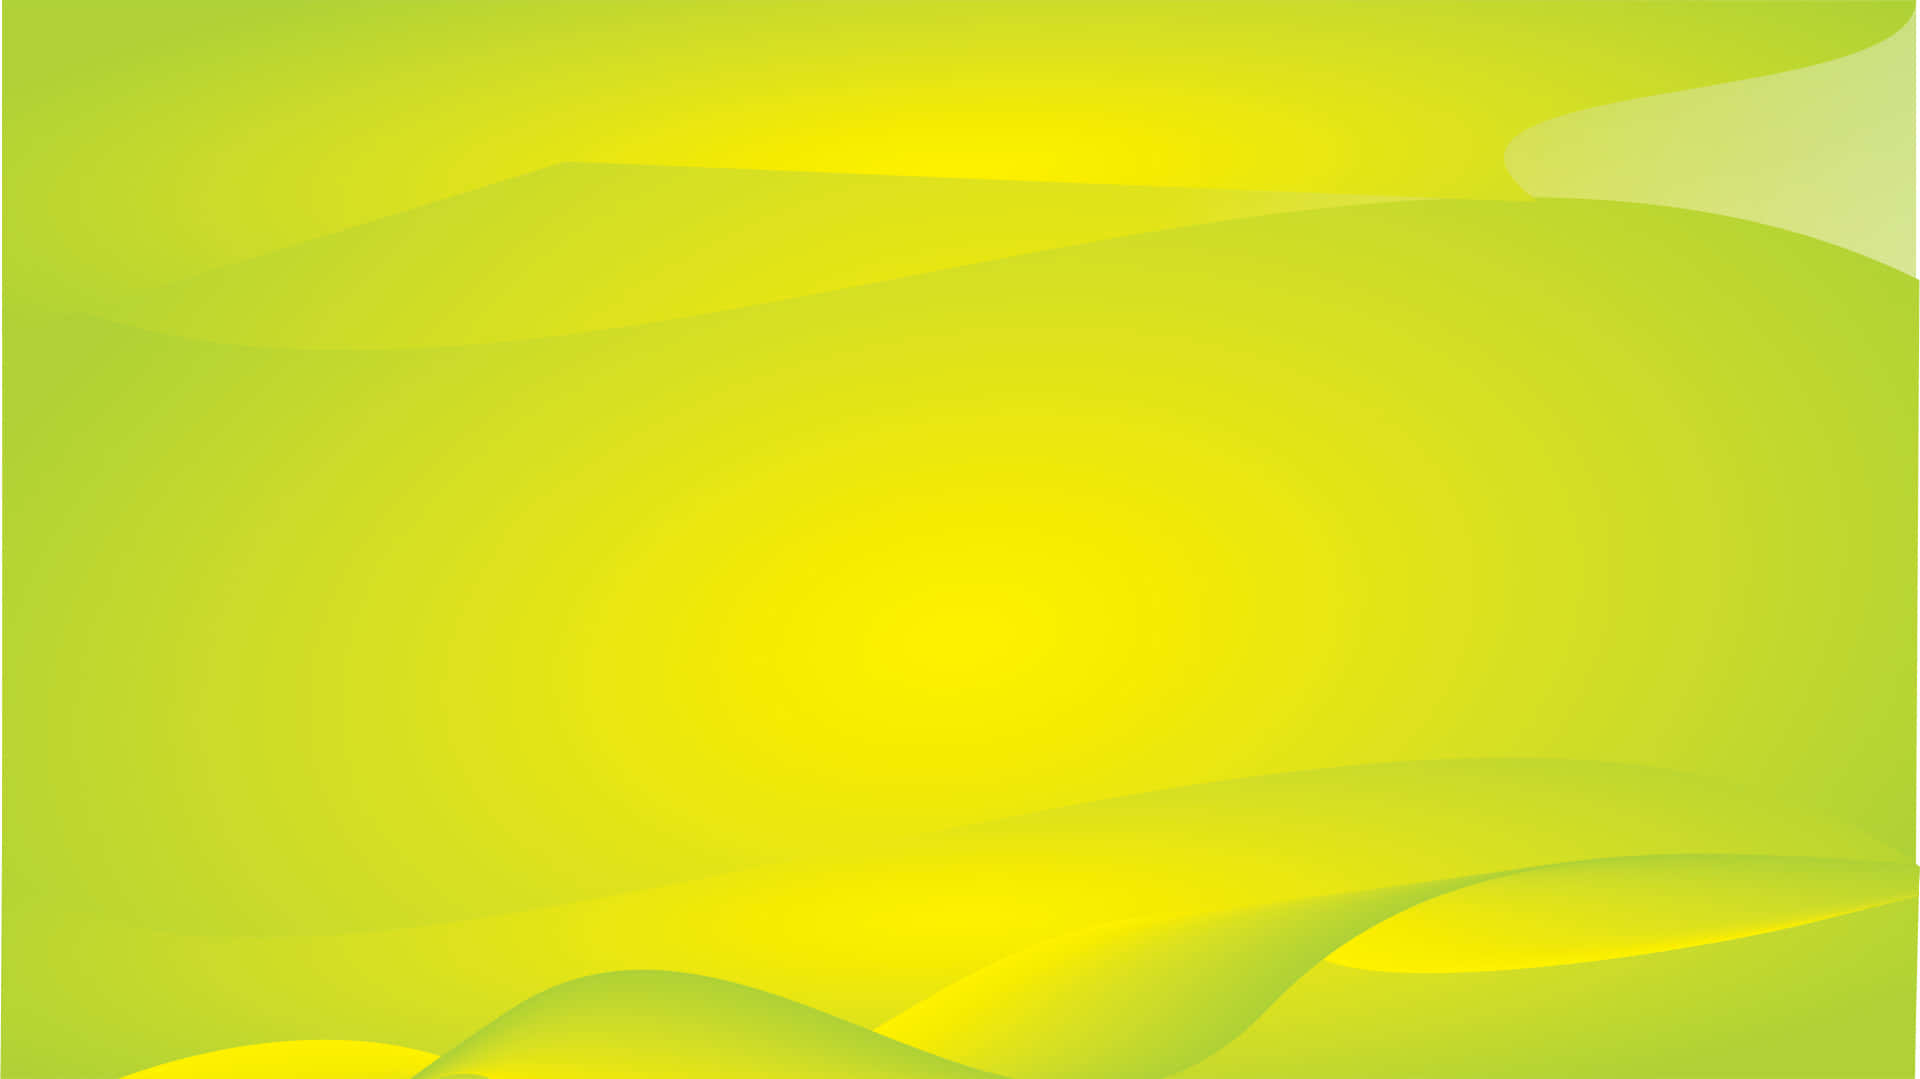 100+] Green And Yellow Background s 